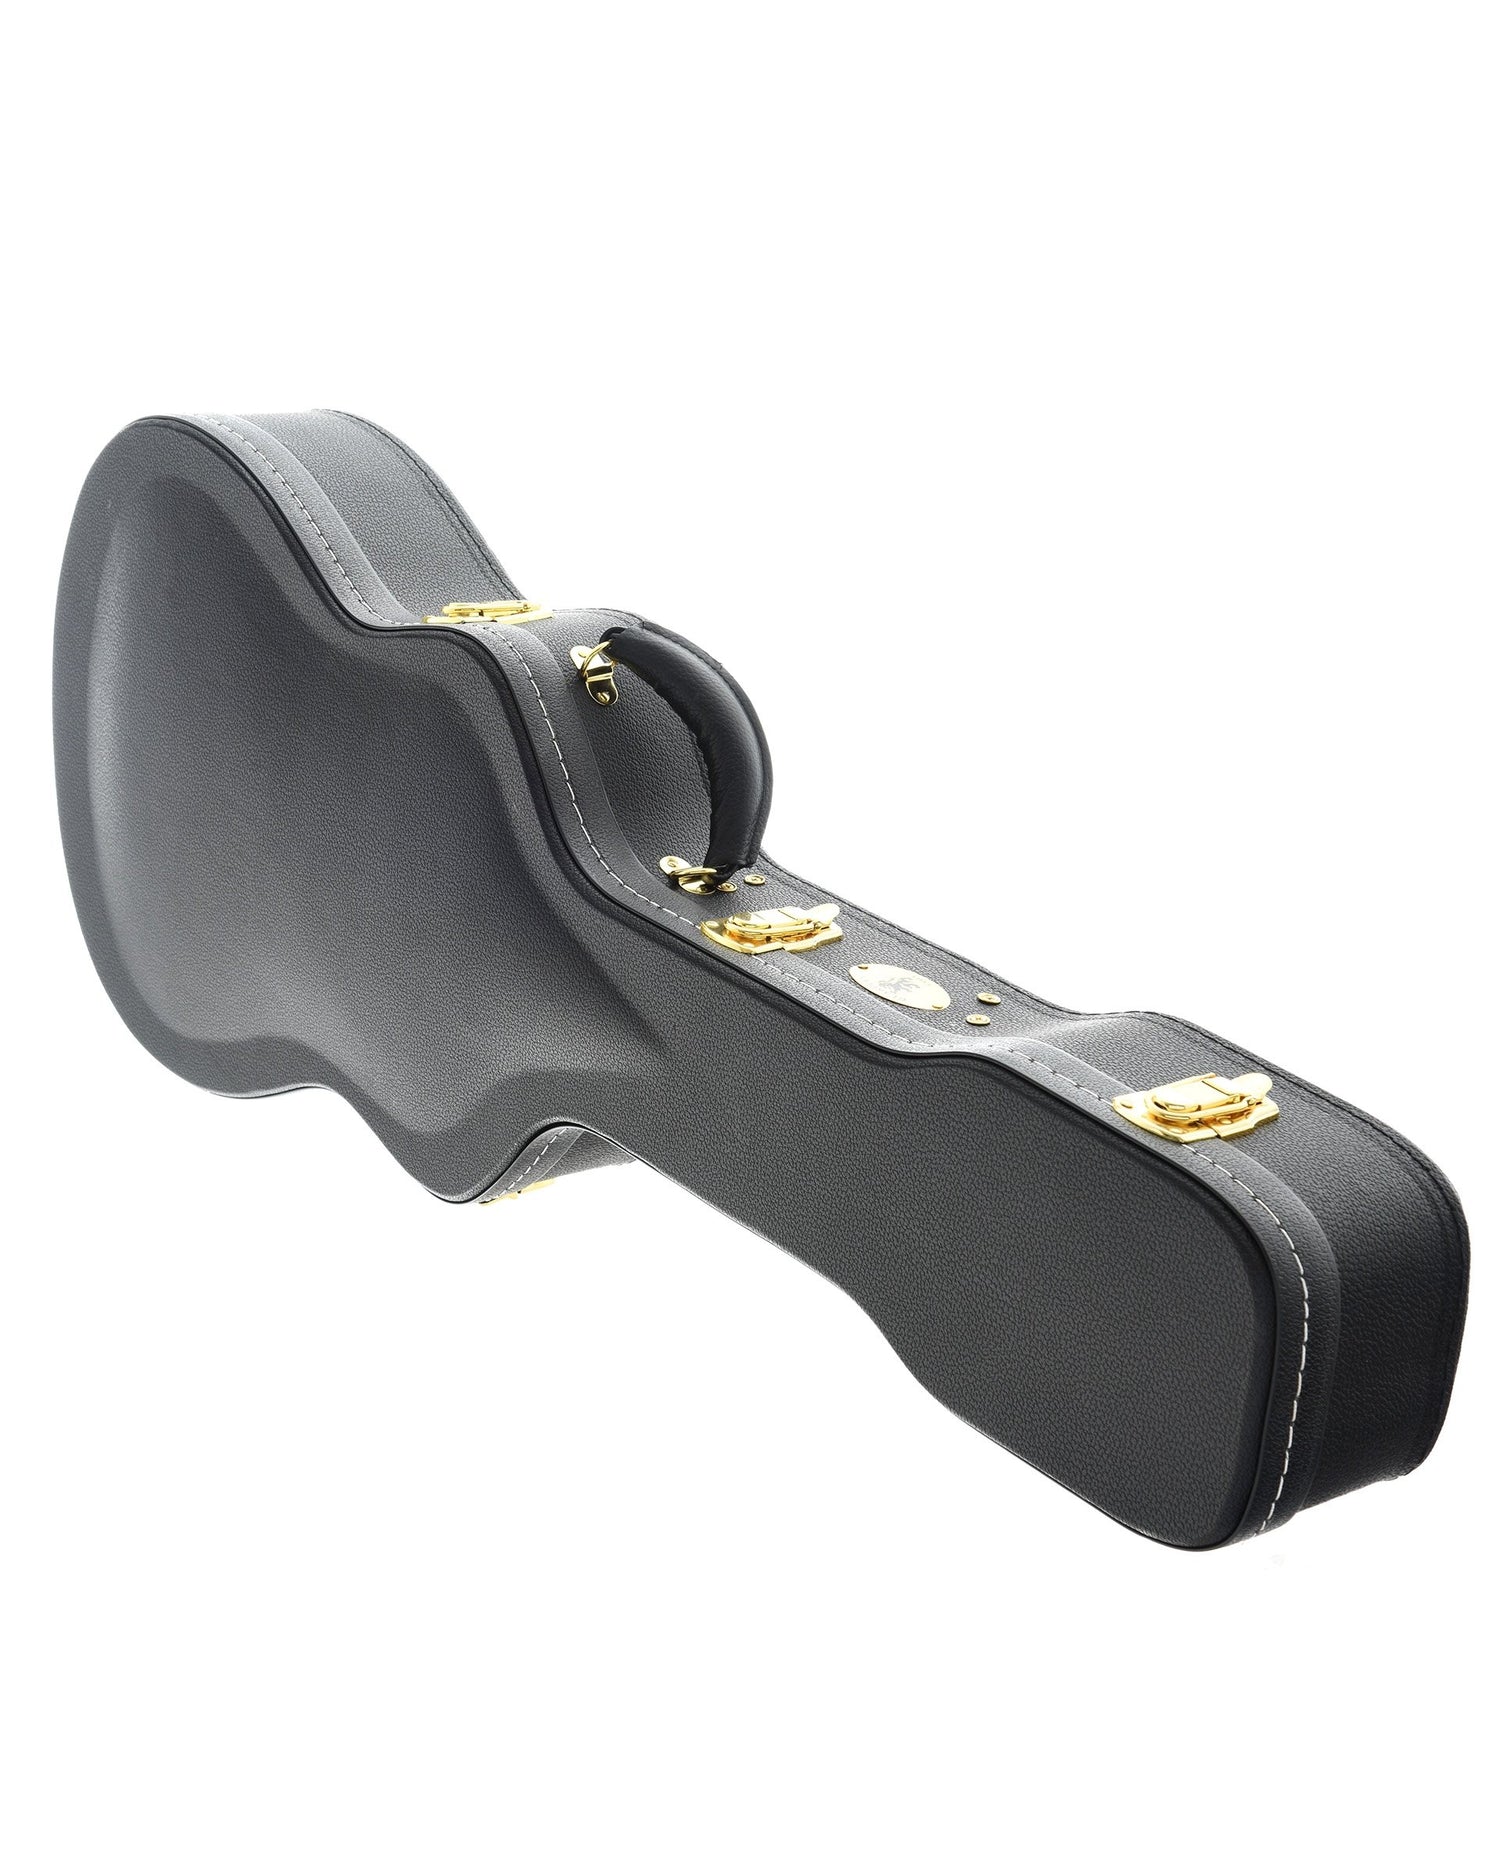 Image 1 of Guardian Vintage "00" Guitar Case - SKU# GVGC-00 : Product Type Accessories & Parts : Elderly Instruments